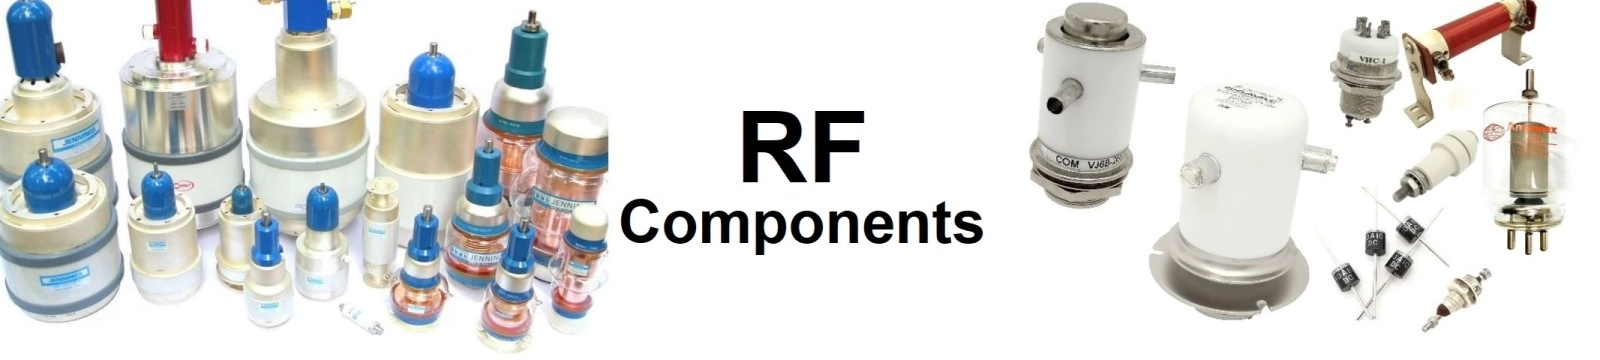 RF Components Banner 1600x360 - Max-Gain Systems, Inc.